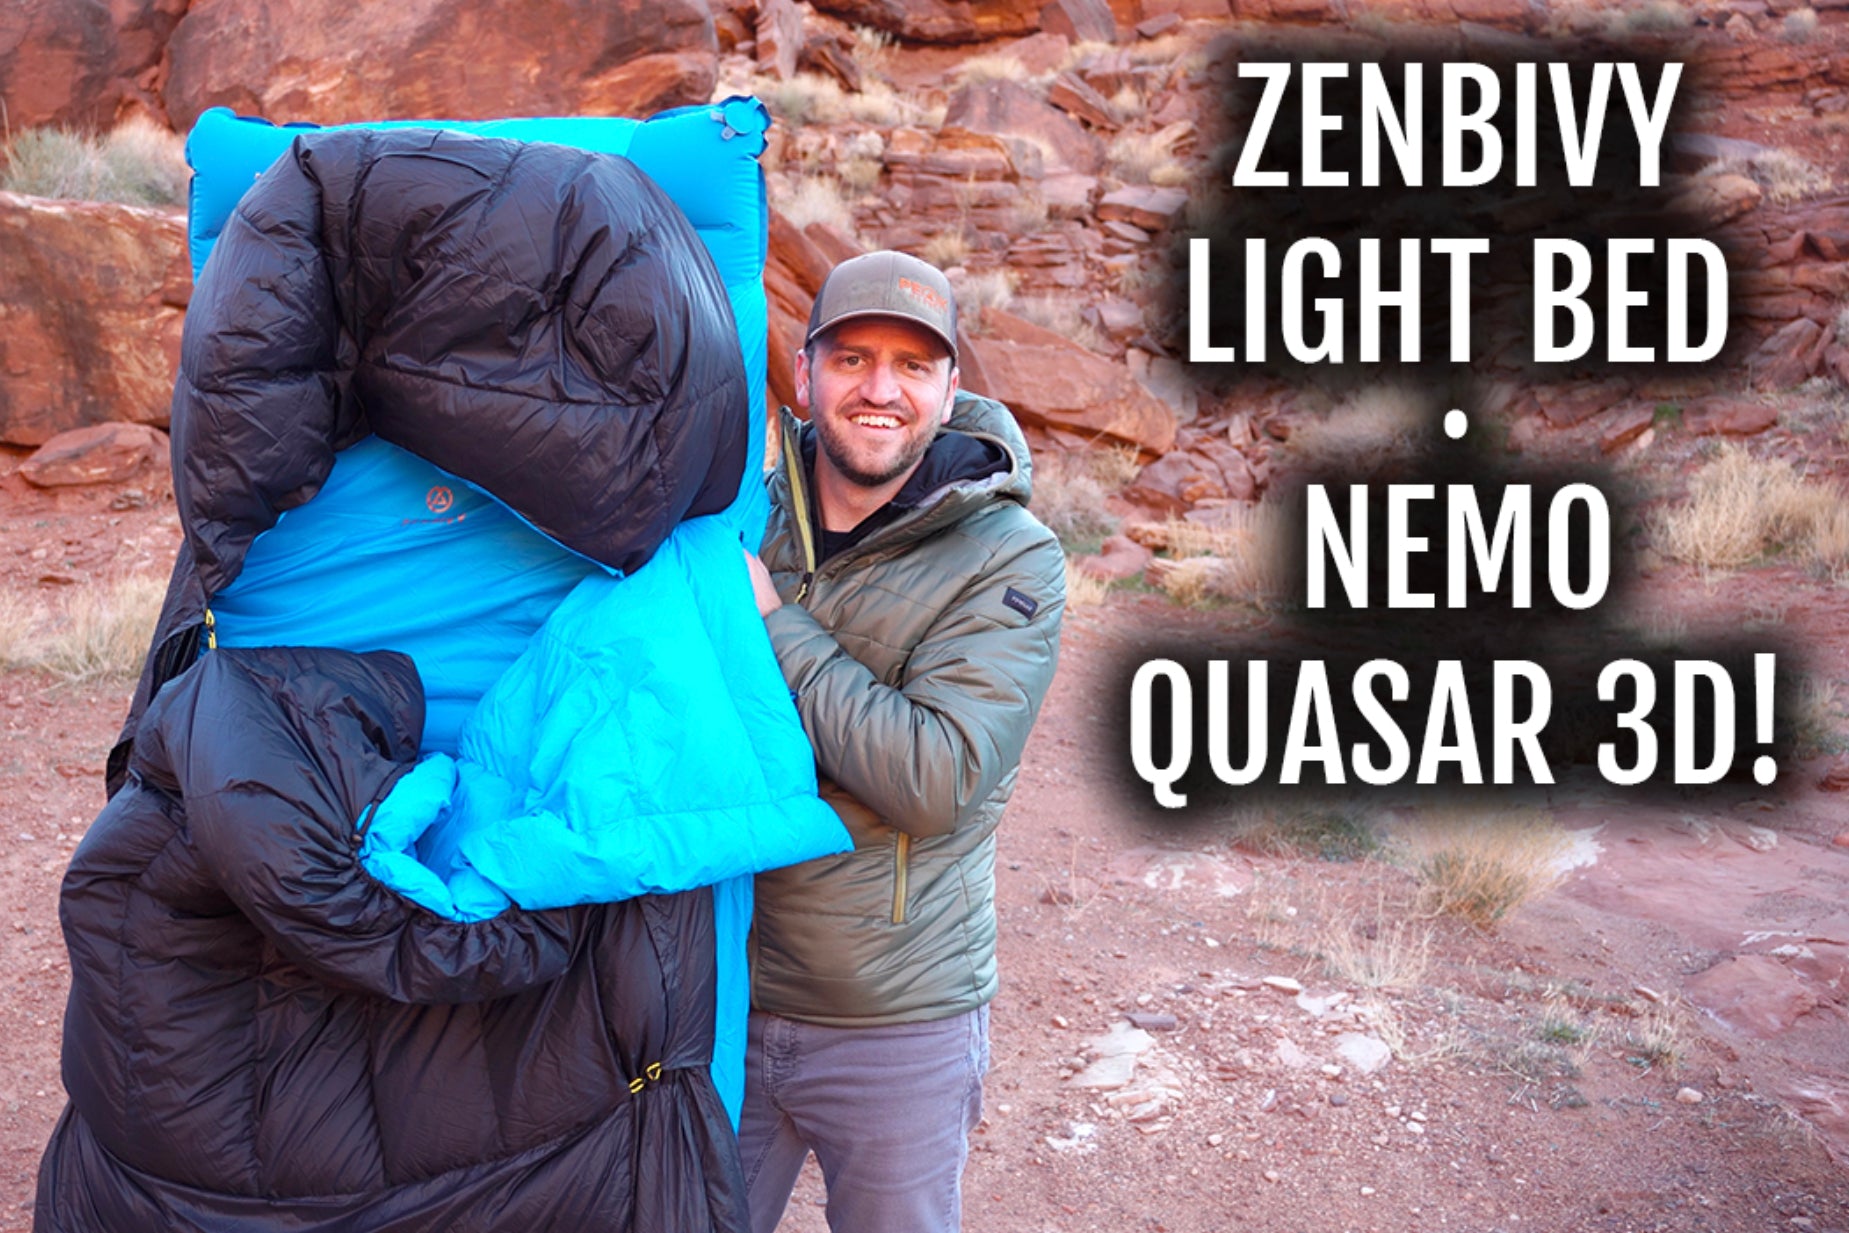 WATCH: Backcountry Exposure reviews the Light Bed